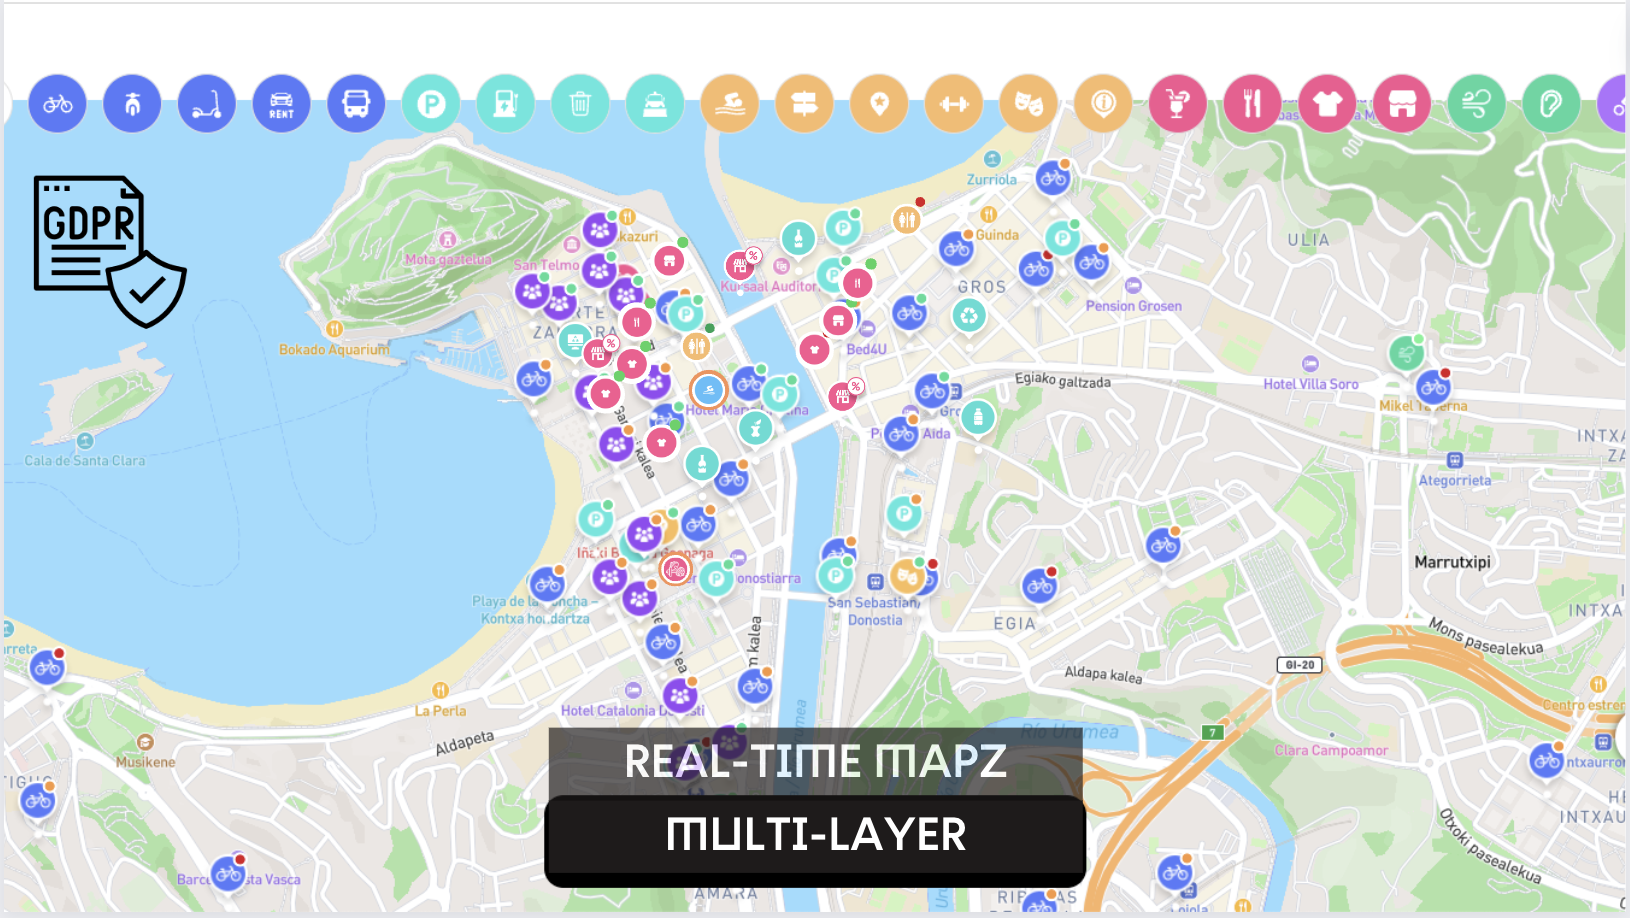 Transforming San Sebastián into a smart, sustainable city with innovative Real-Time Services